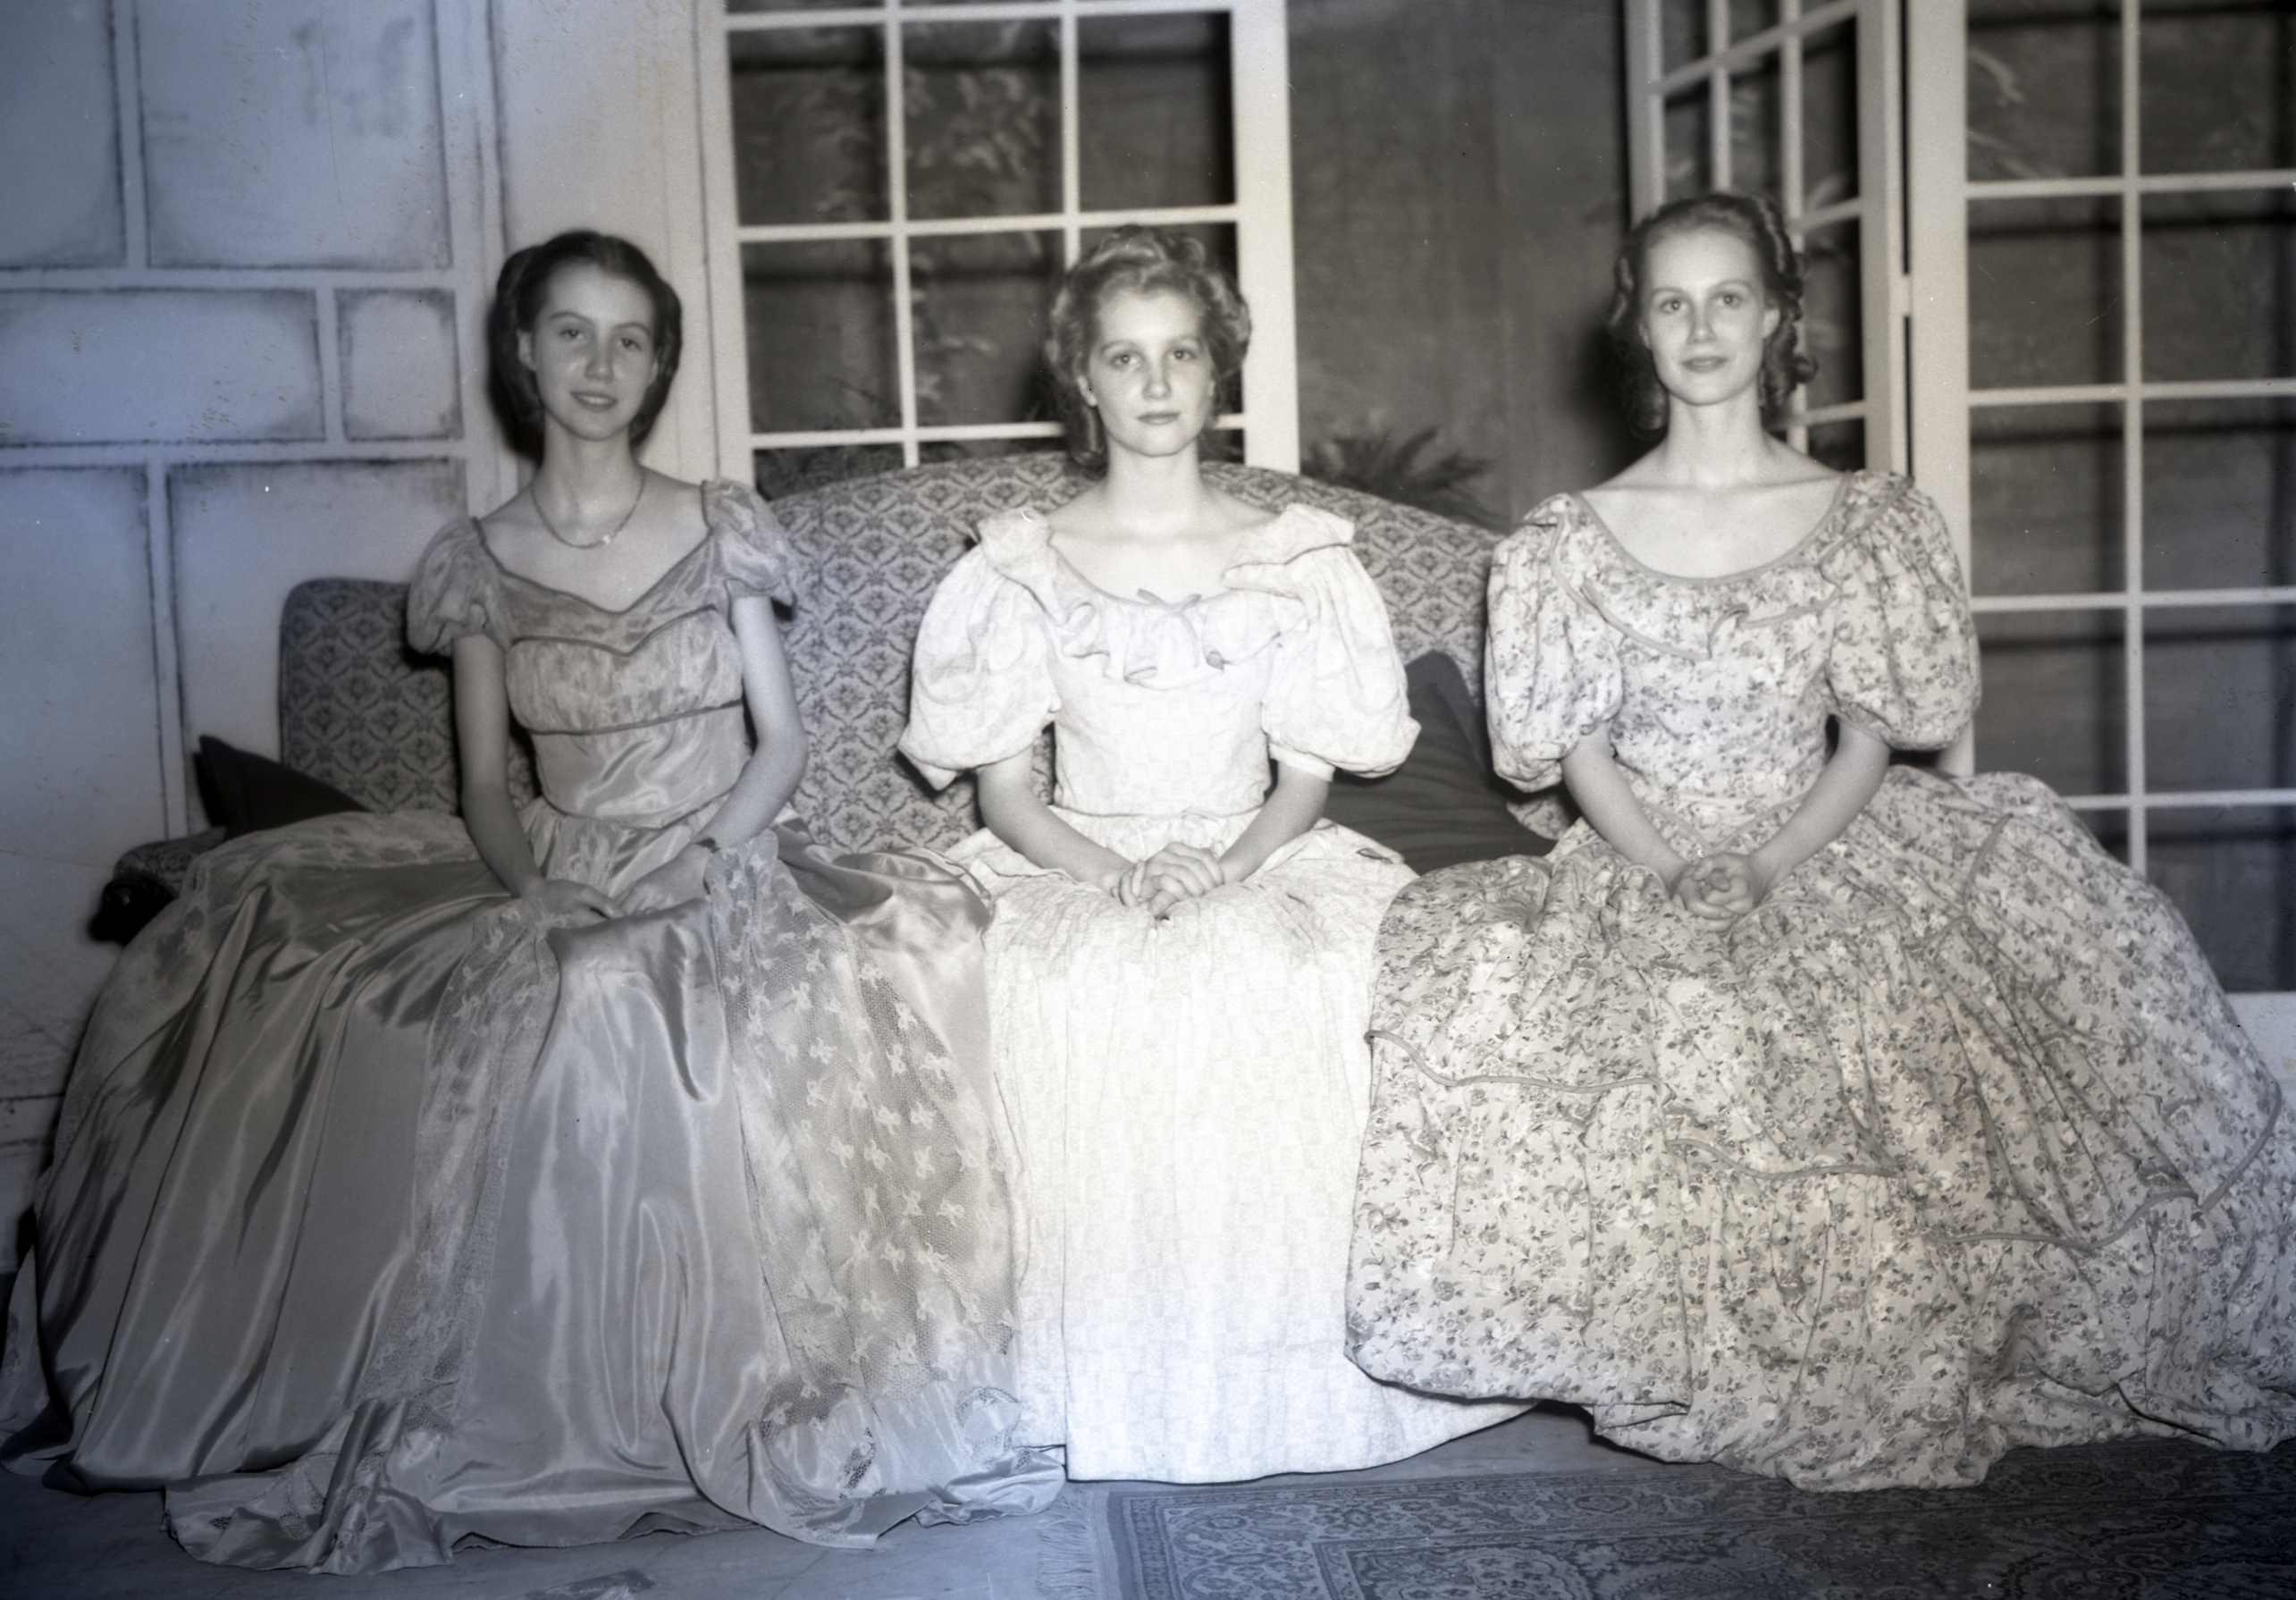 Three young women sitting on a chair wearing long dresses.